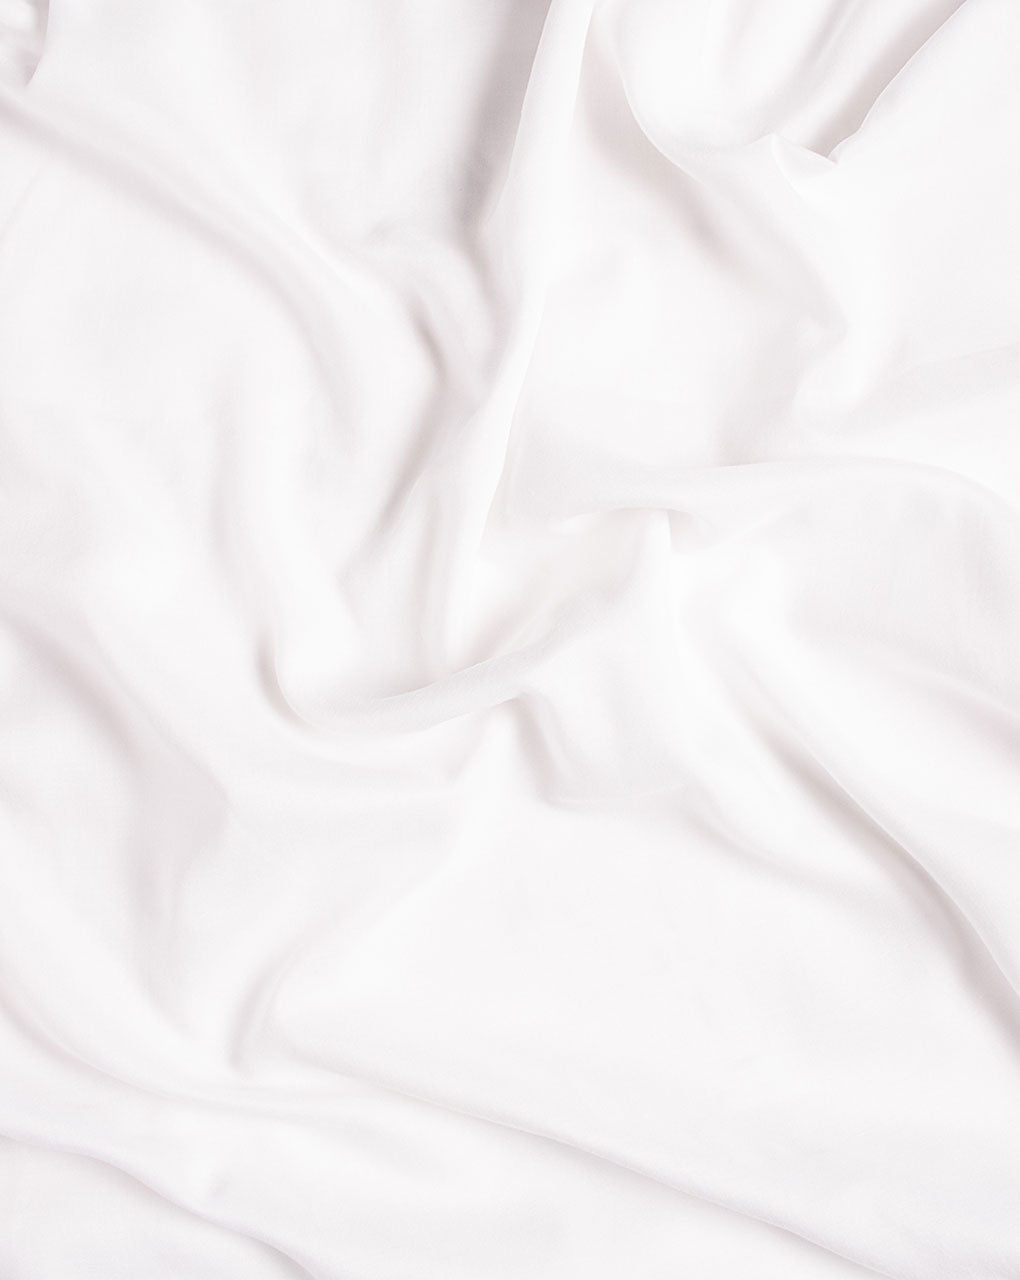 Light Texture Plain White Cotton Cloth - 44 Inches Width And 30 Meter Long  Density: 145 Gram Per Cubic Centimeter(g/cm3) at Best Price in Varanasi